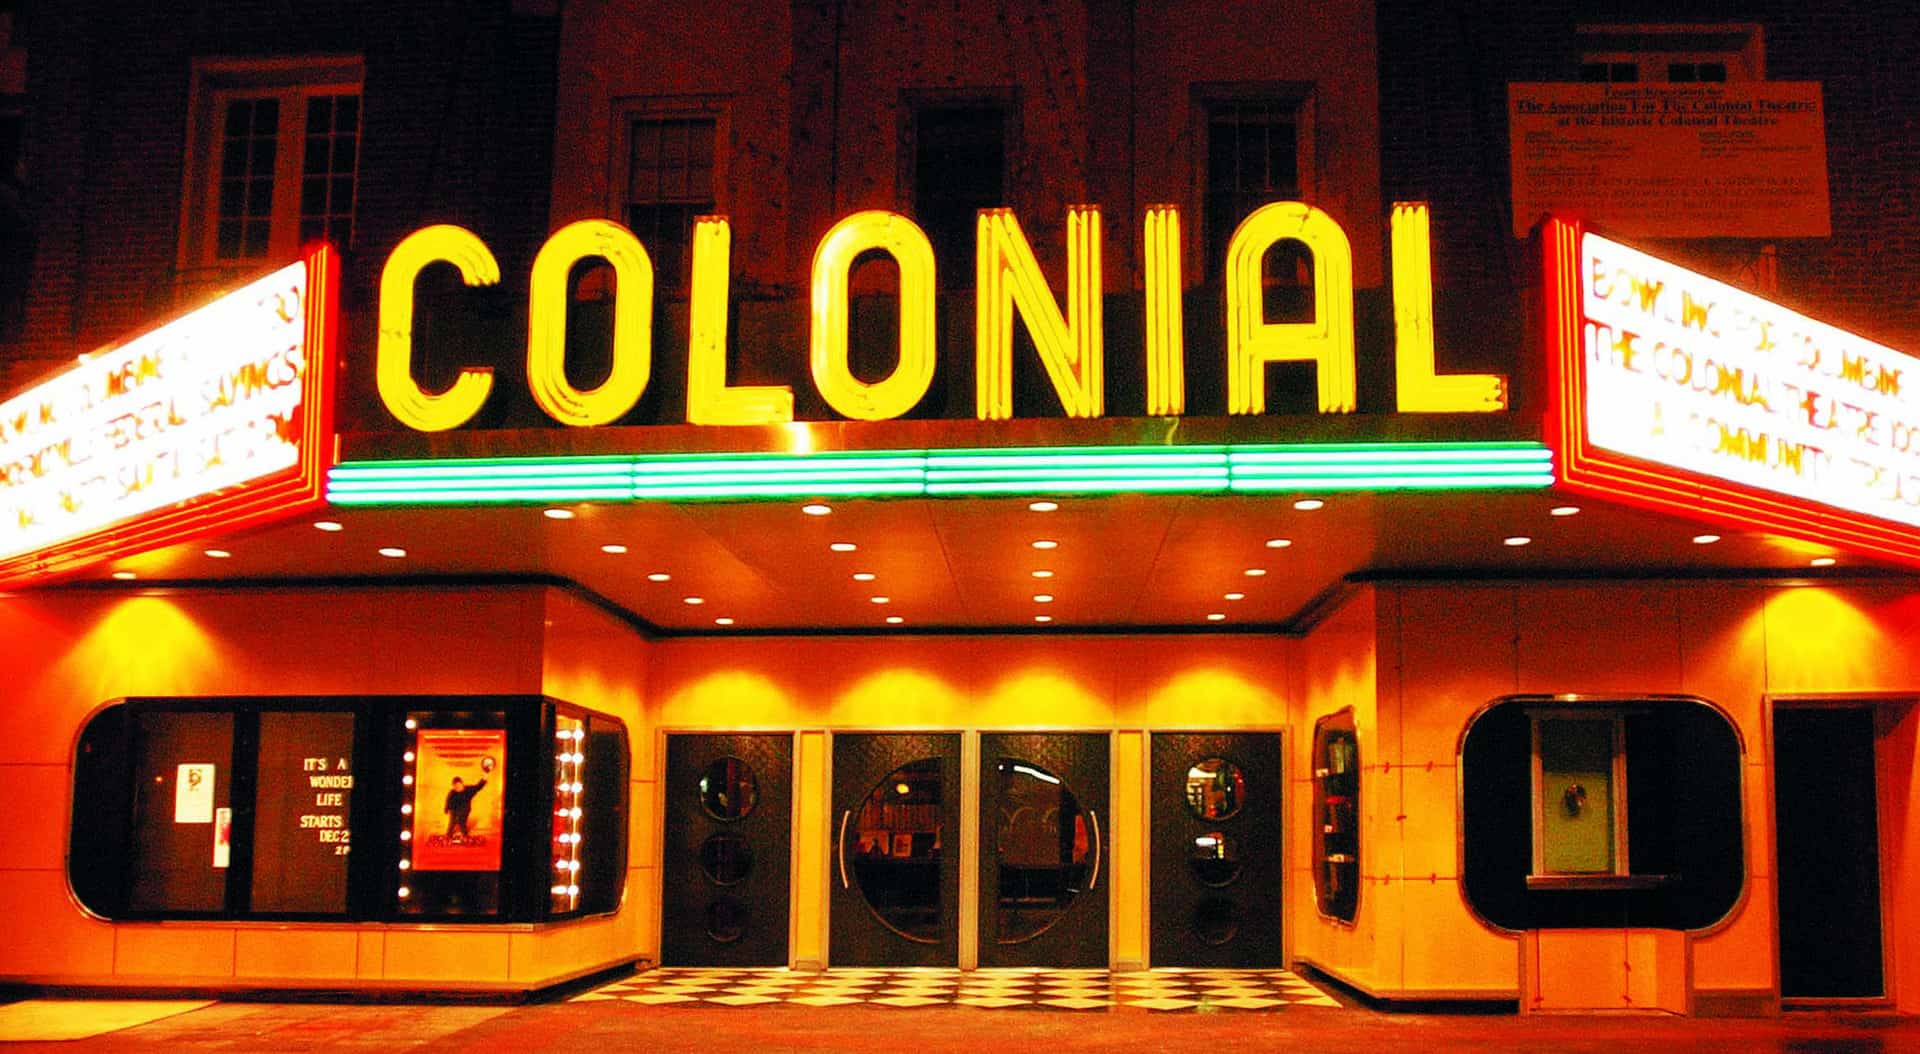 colonial-theatre-front-barry-taglieber-phoenixville-pa